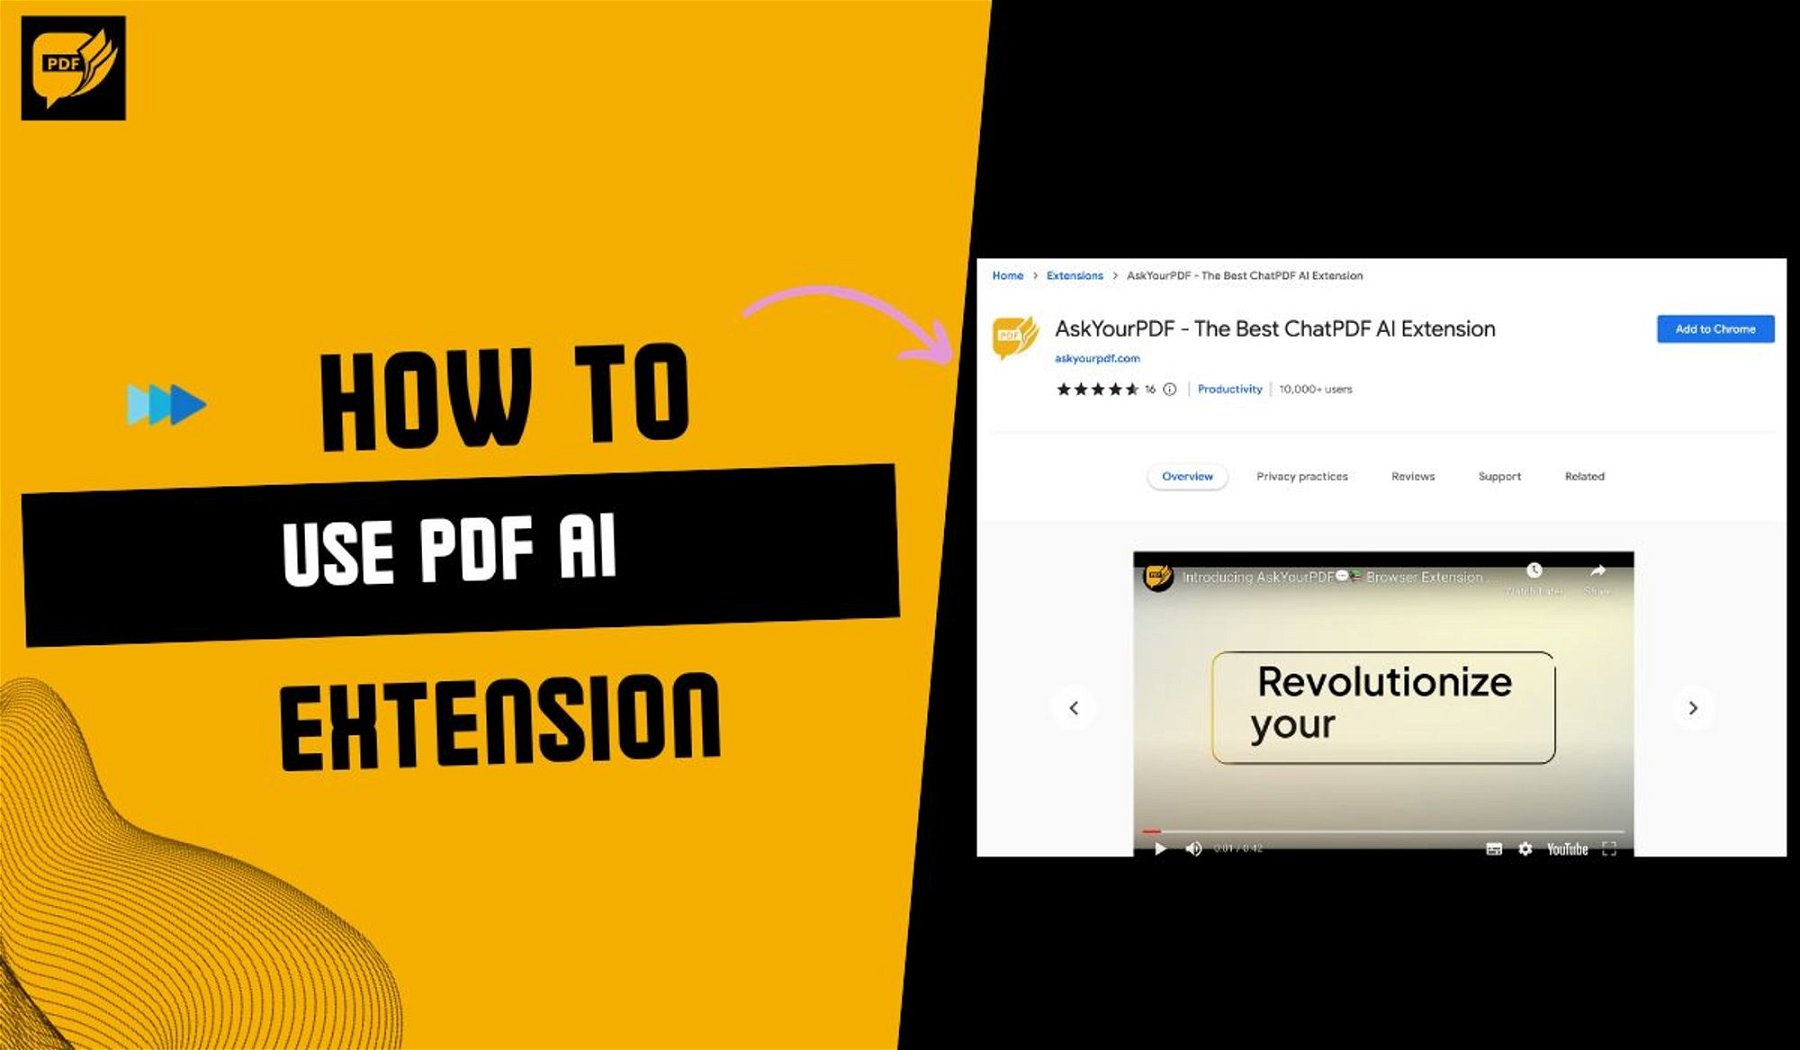 How to Use the PDF AI Extension